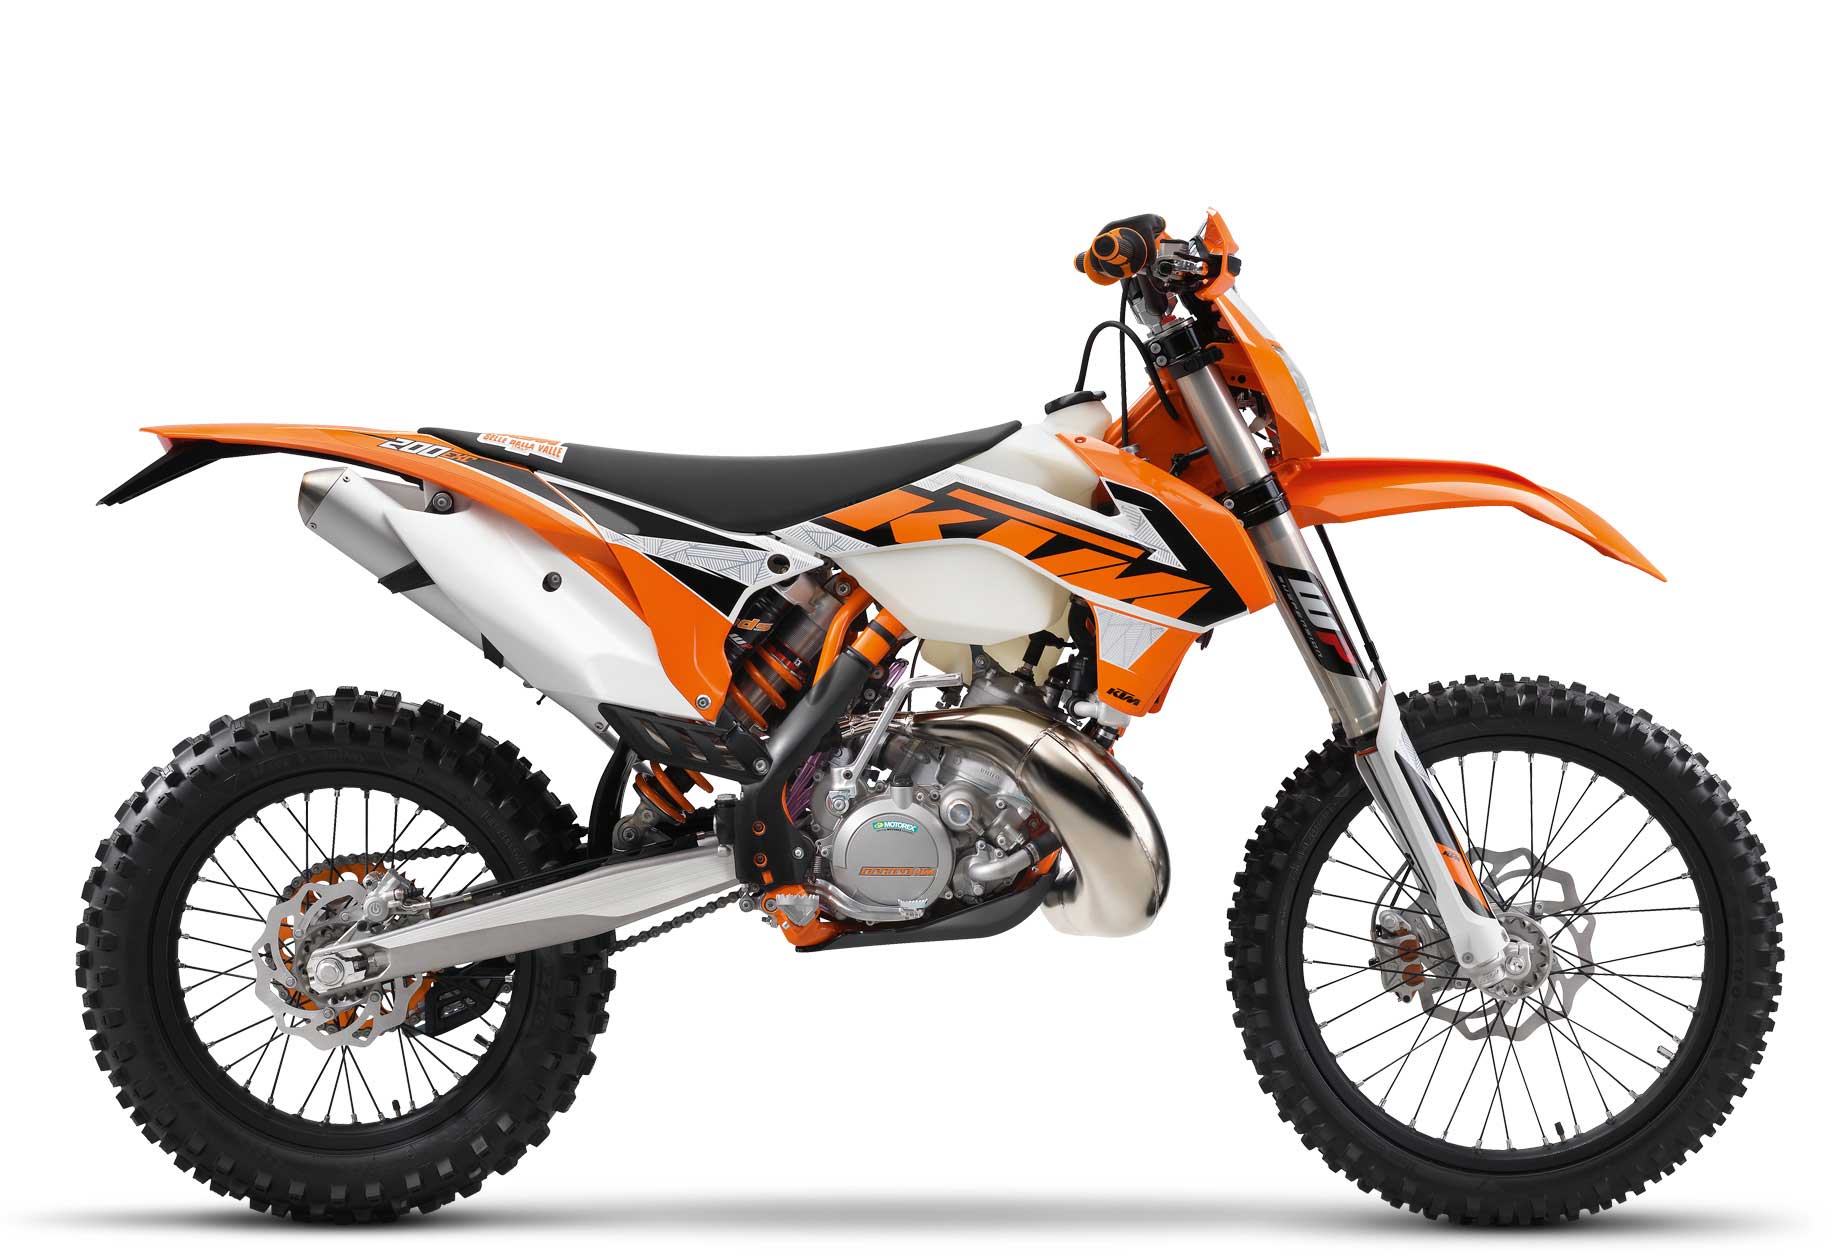 KTM 200 EXC side view